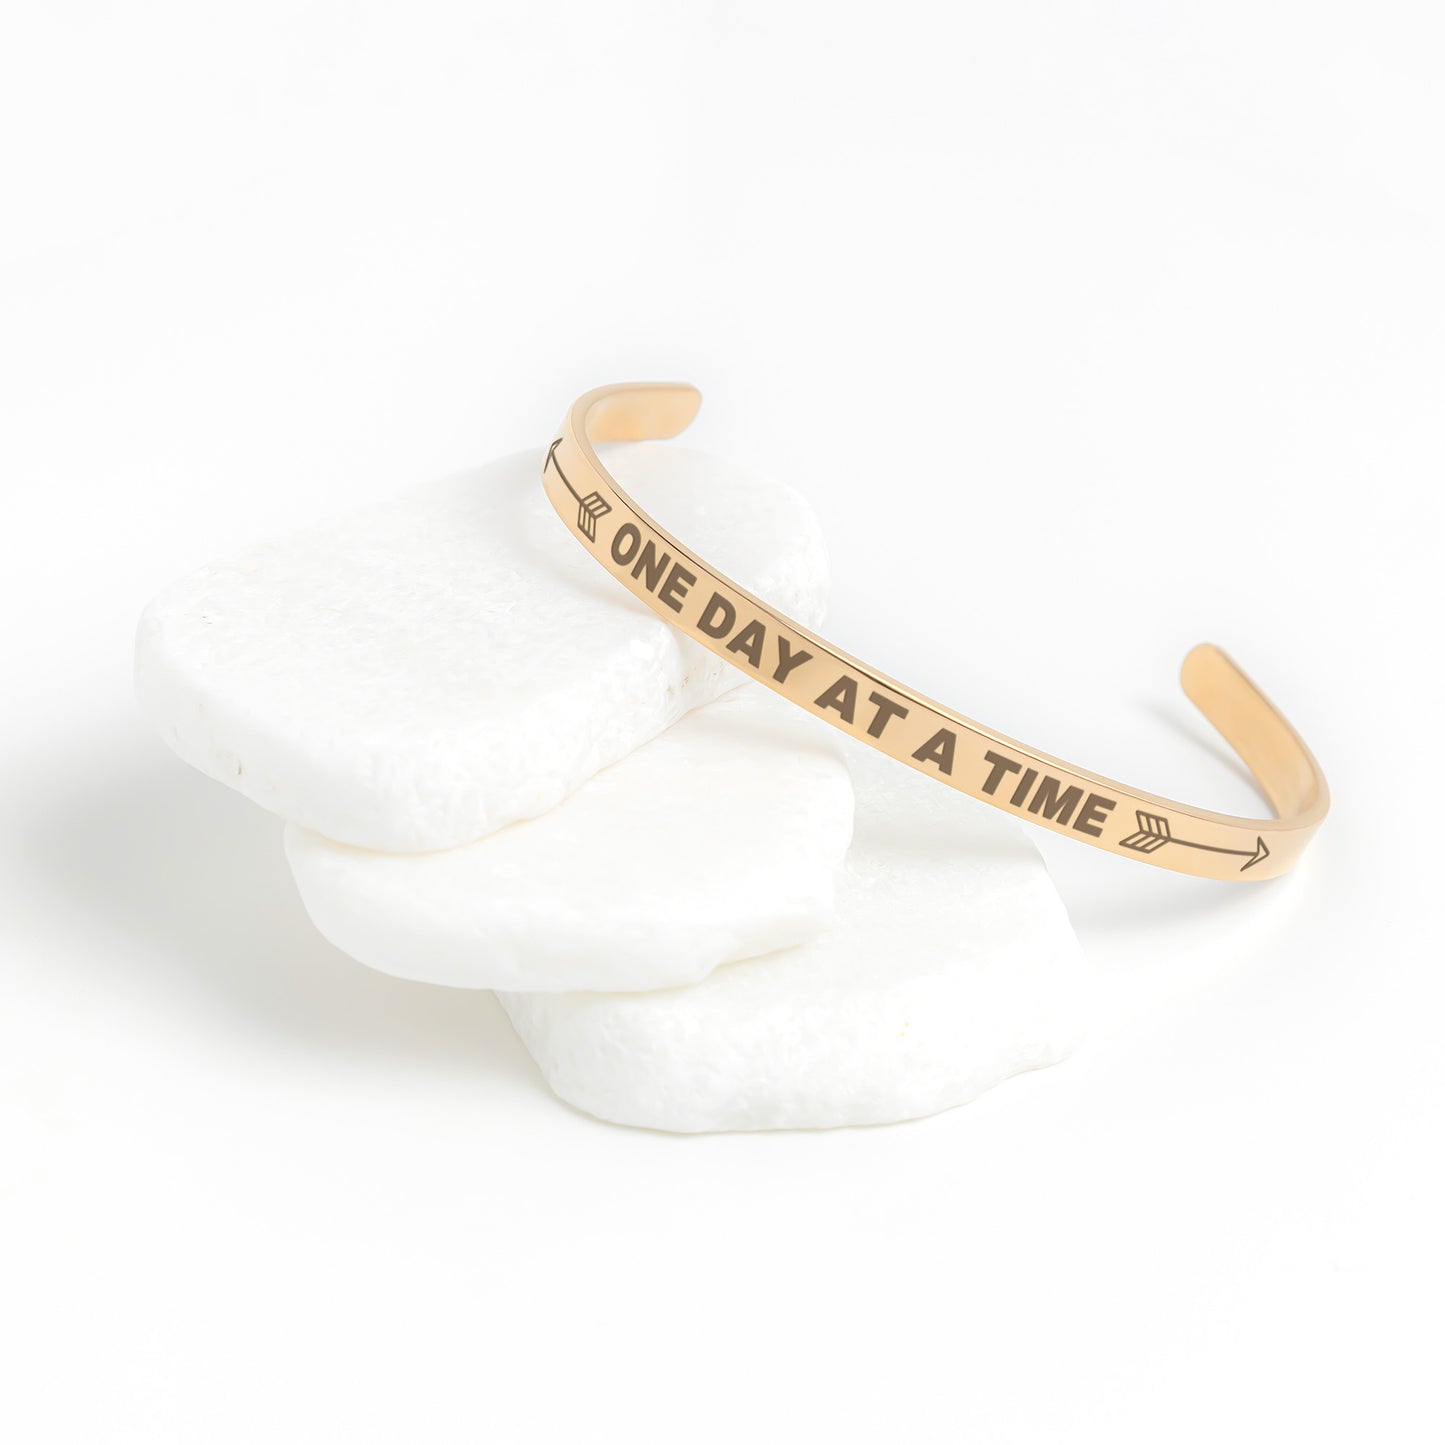 ONE DAY AT A TIME | CUFF BRACELET